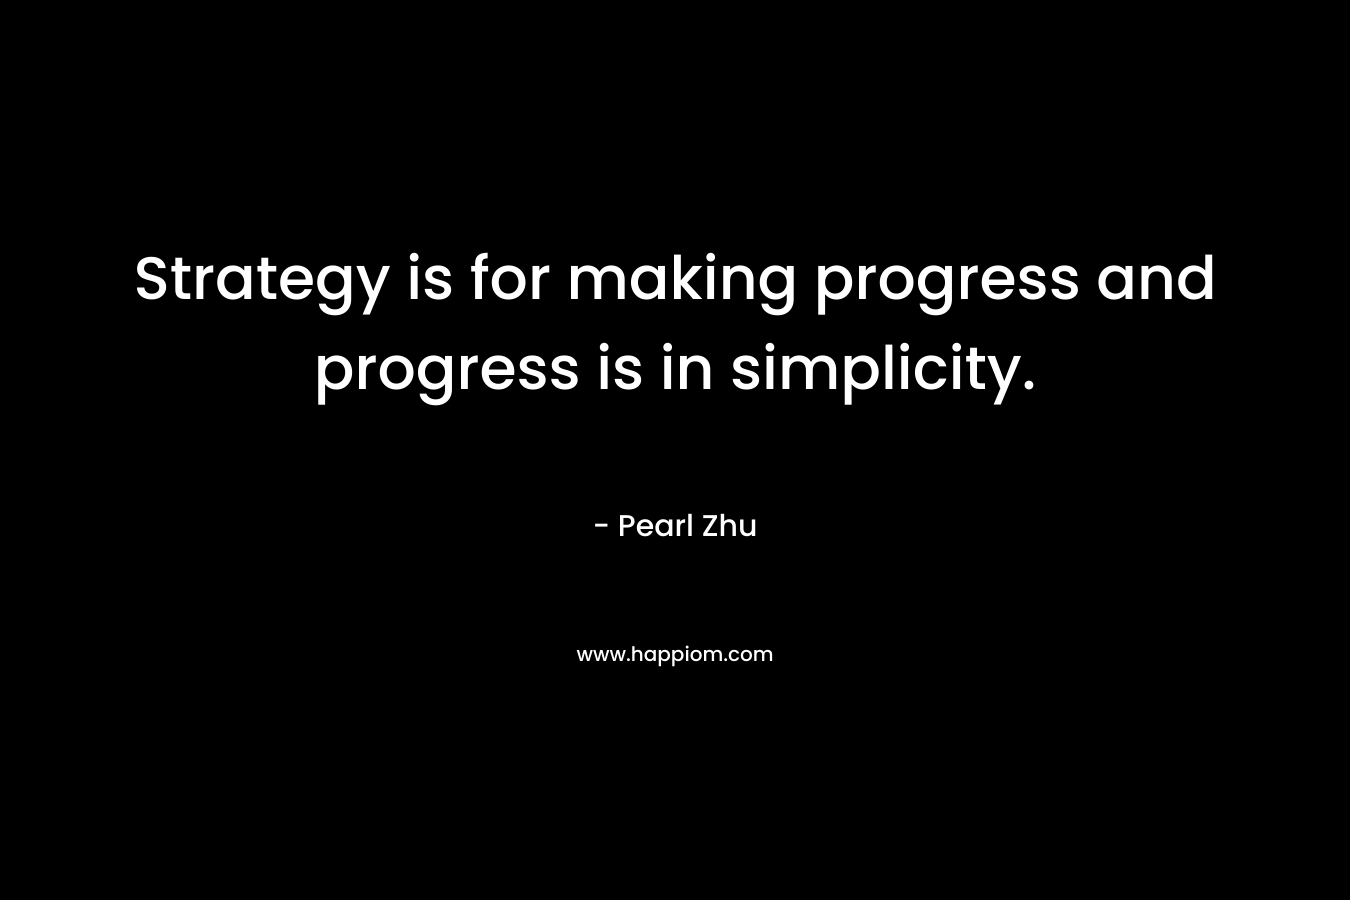 Strategy is for making progress and progress is in simplicity. – Pearl Zhu